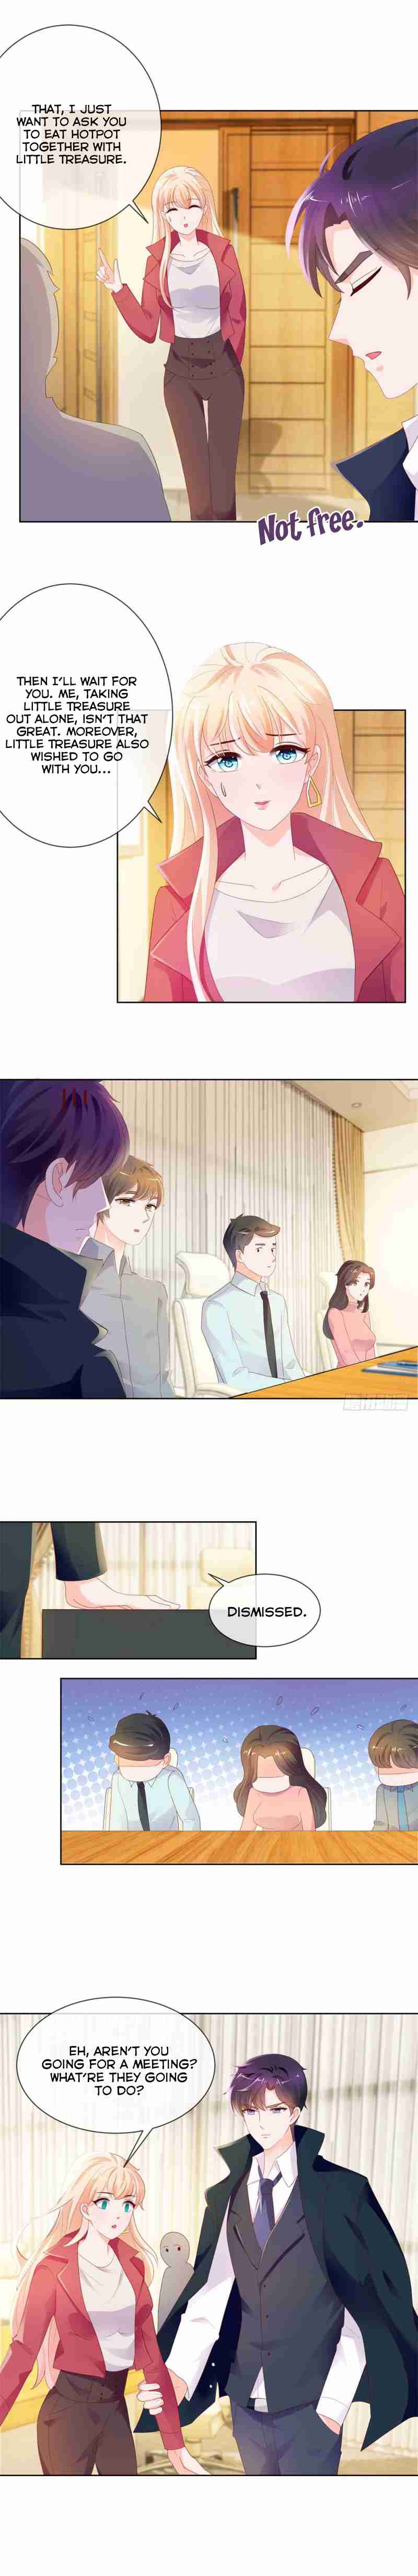 Full Marks, Hidden Marriage Ch. 32 Is It My Fault To Have Charm?